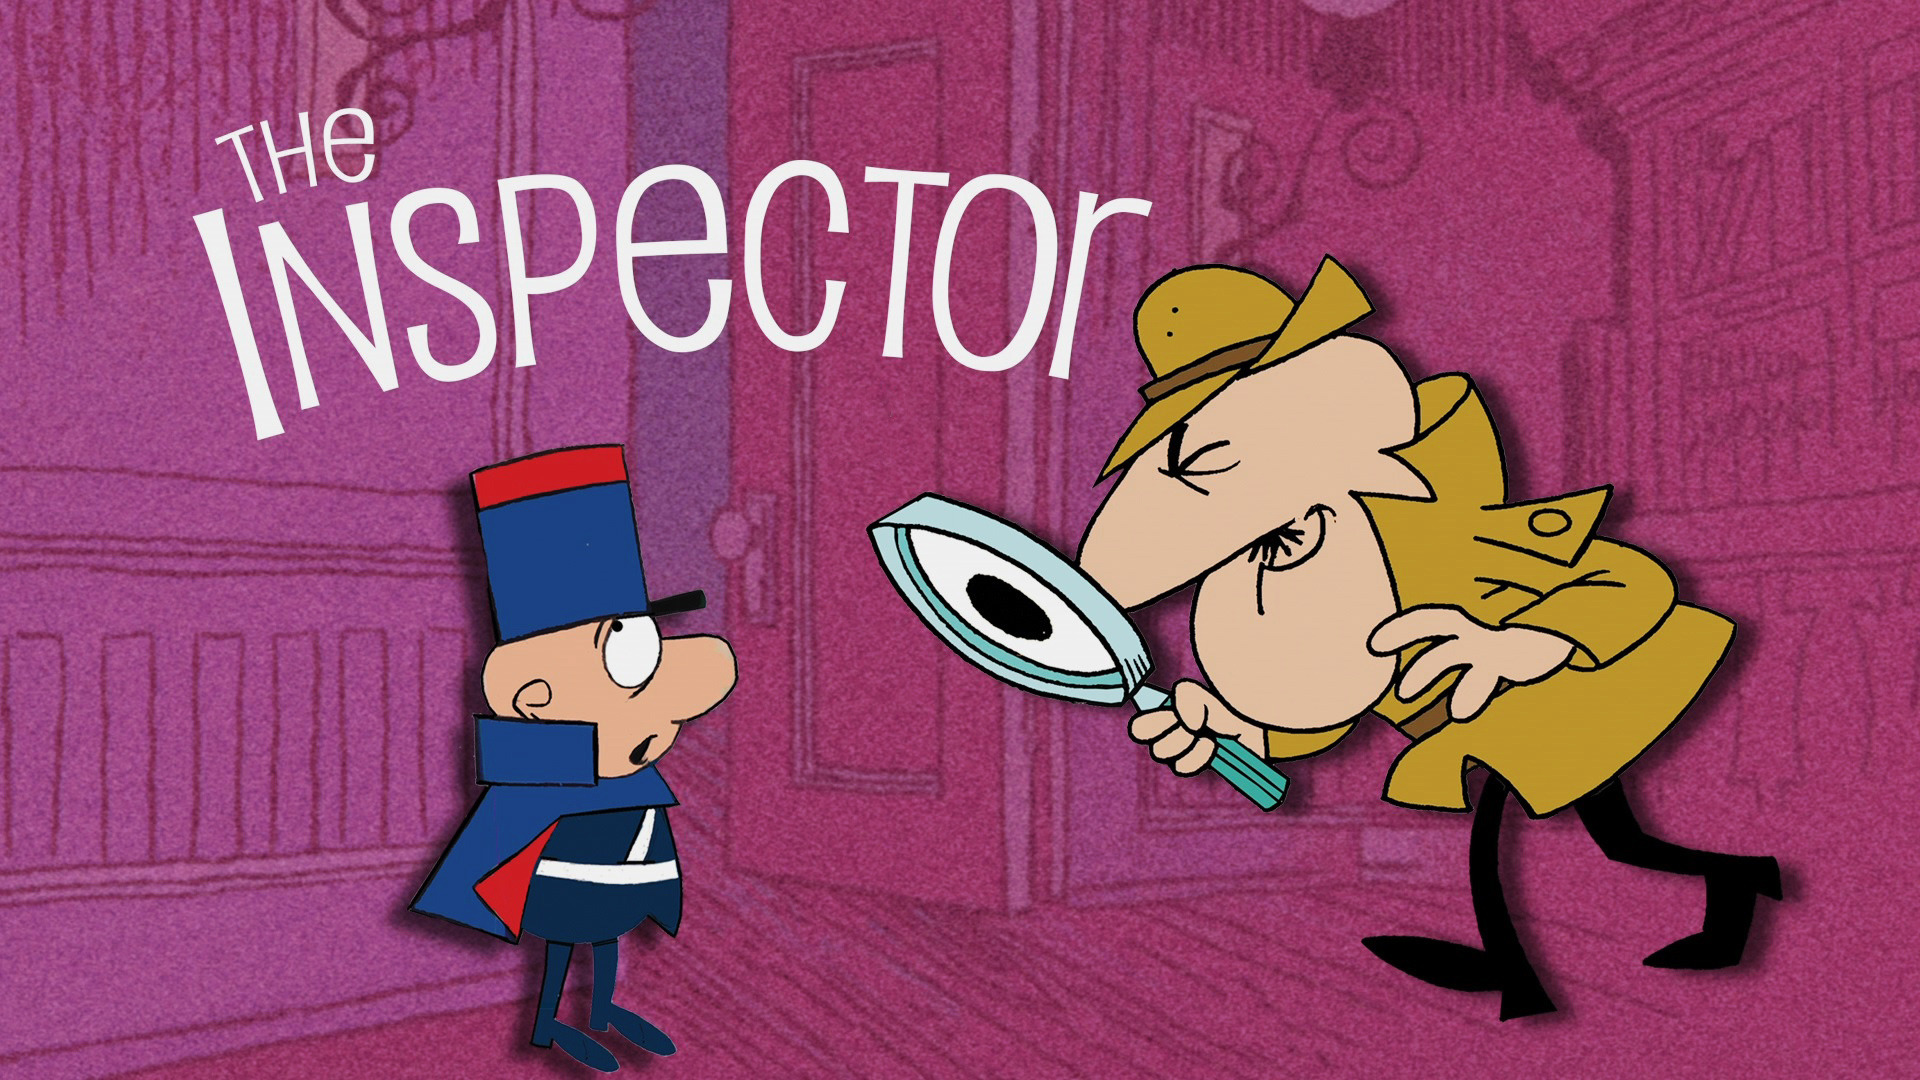 Show The Inspector